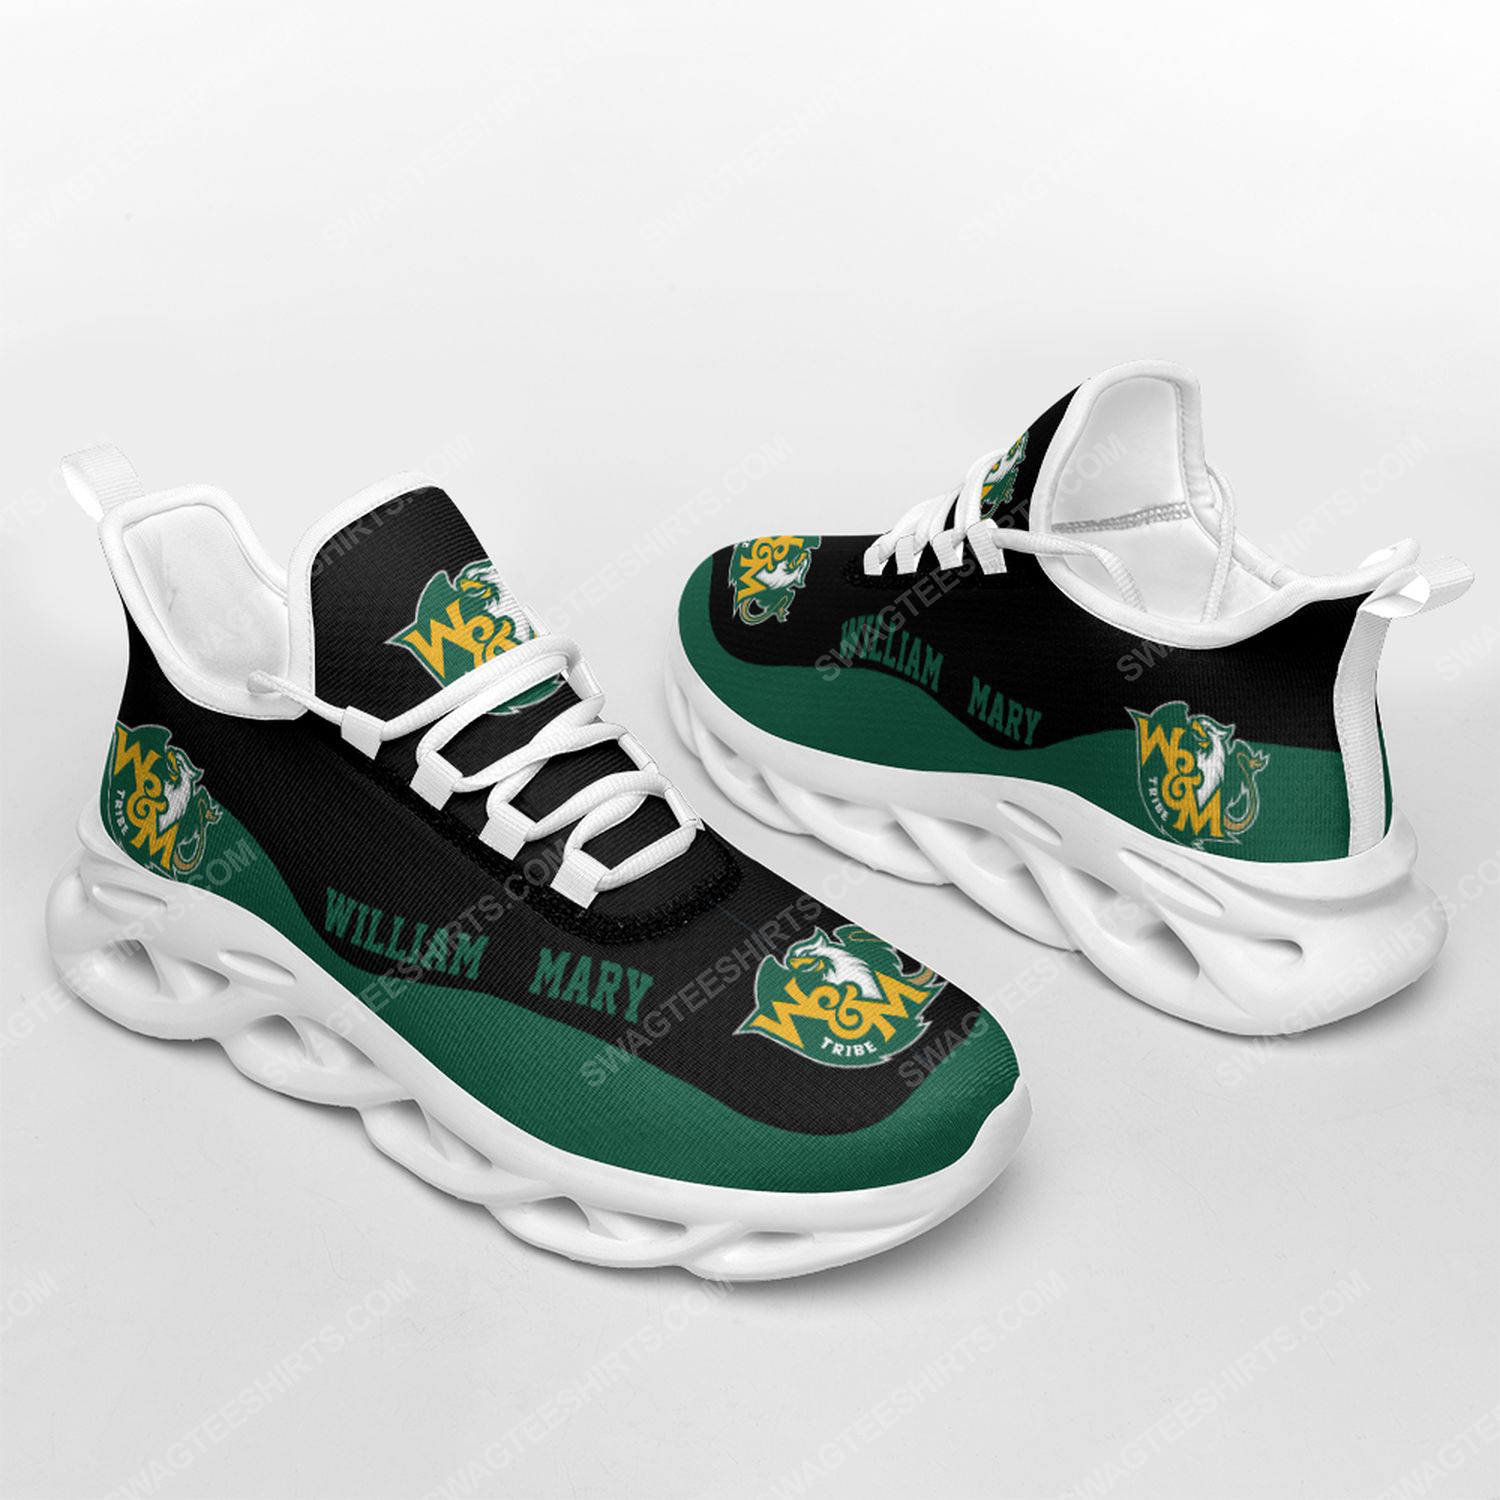 The william and mary tribe football team max soul shoes 2